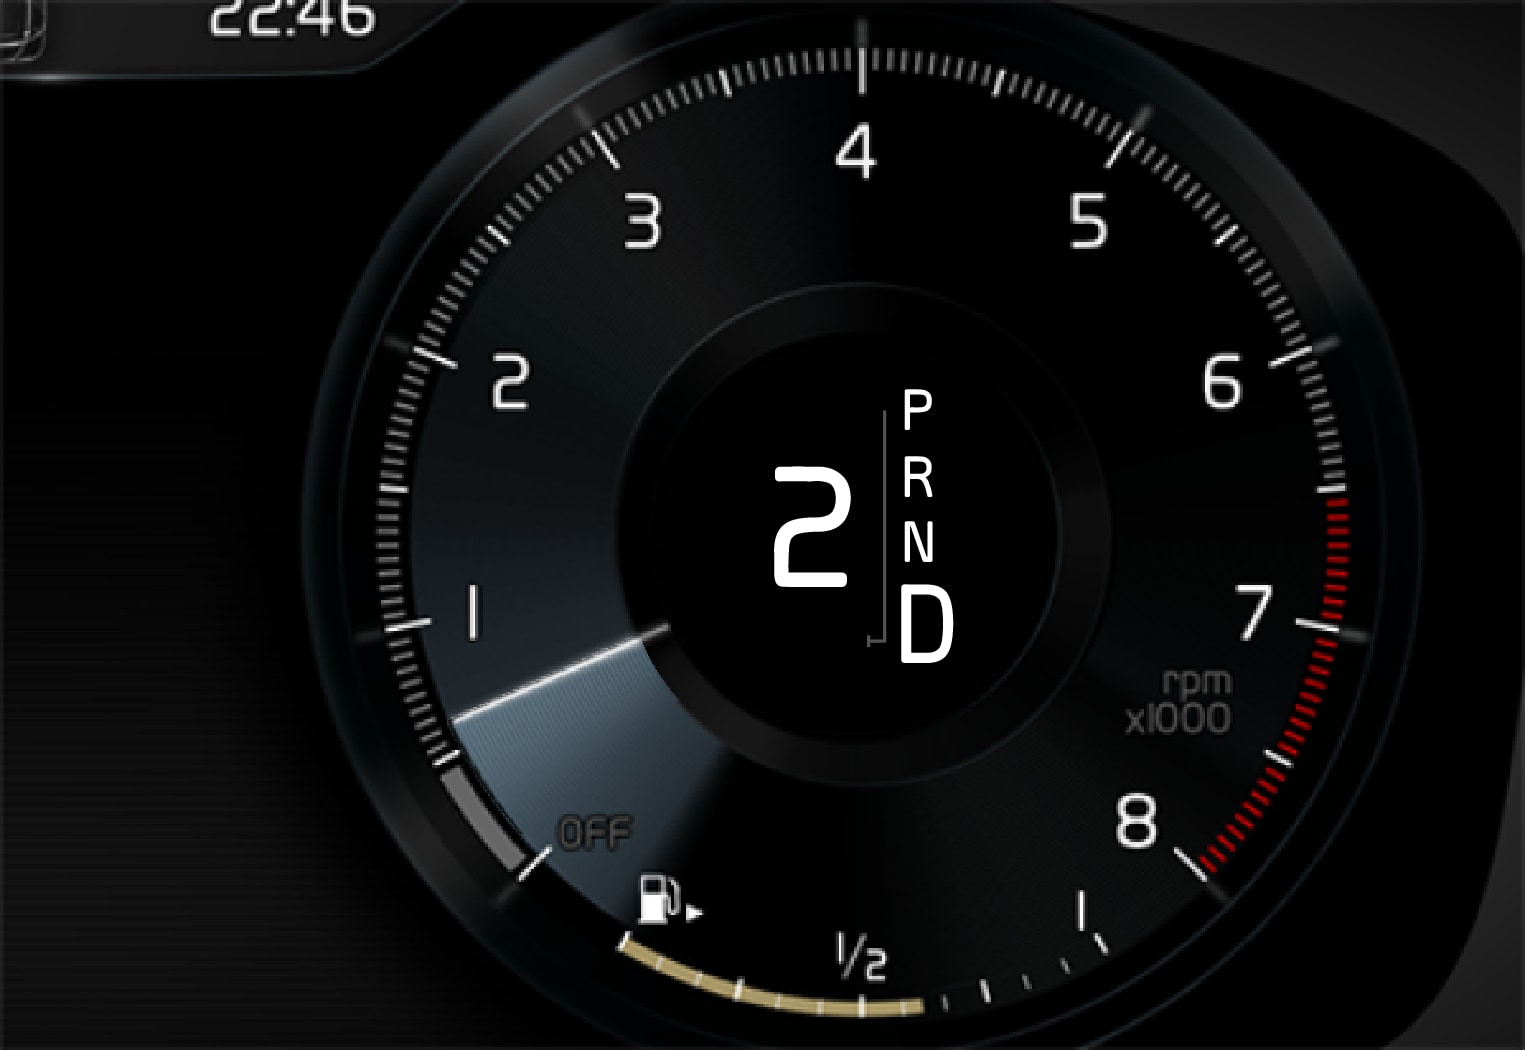 P5-1917-Old-Gear shift mode D in driver display